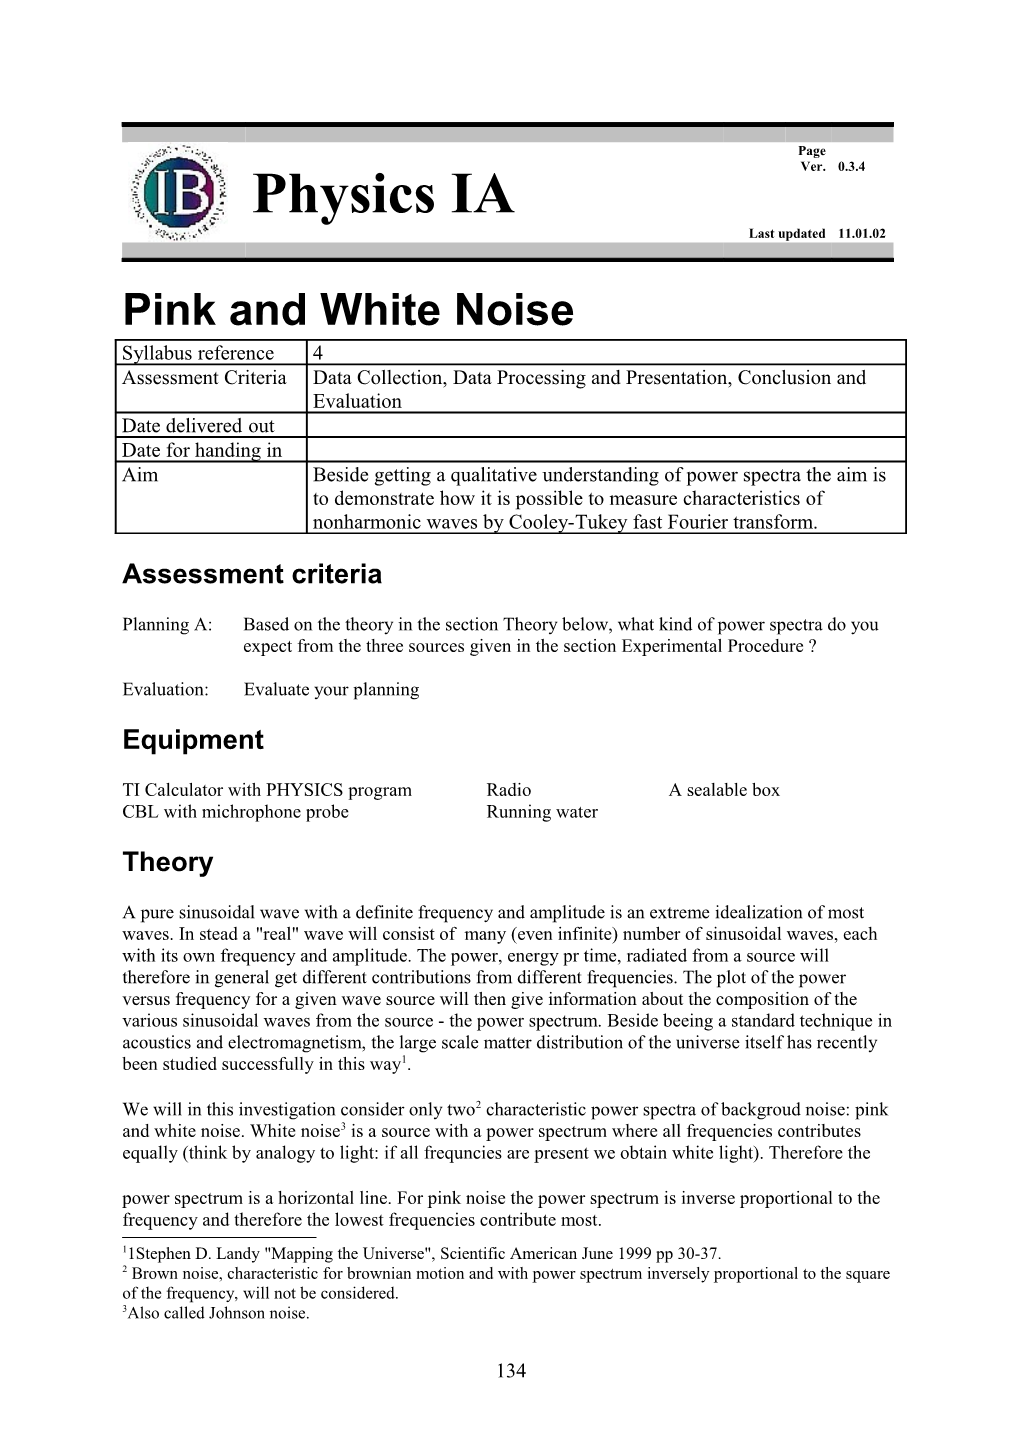 Pink and White Noise